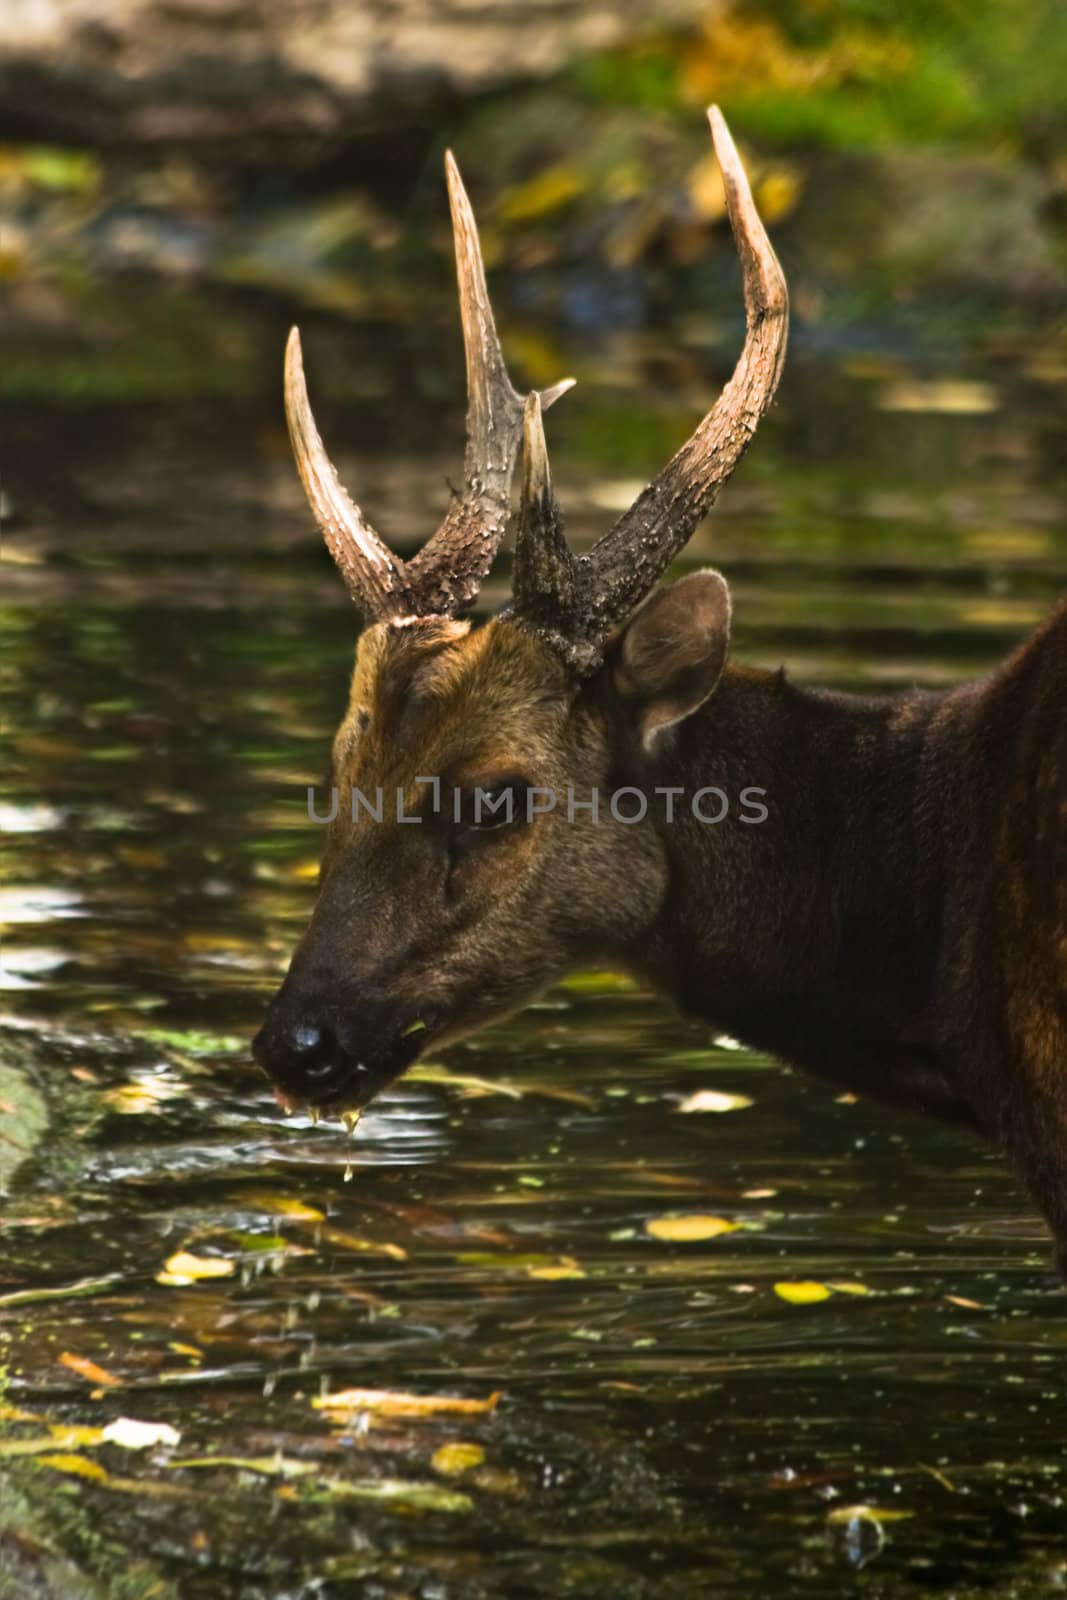 Philppine spotted deer eating fallen leaves out of the water in autumn